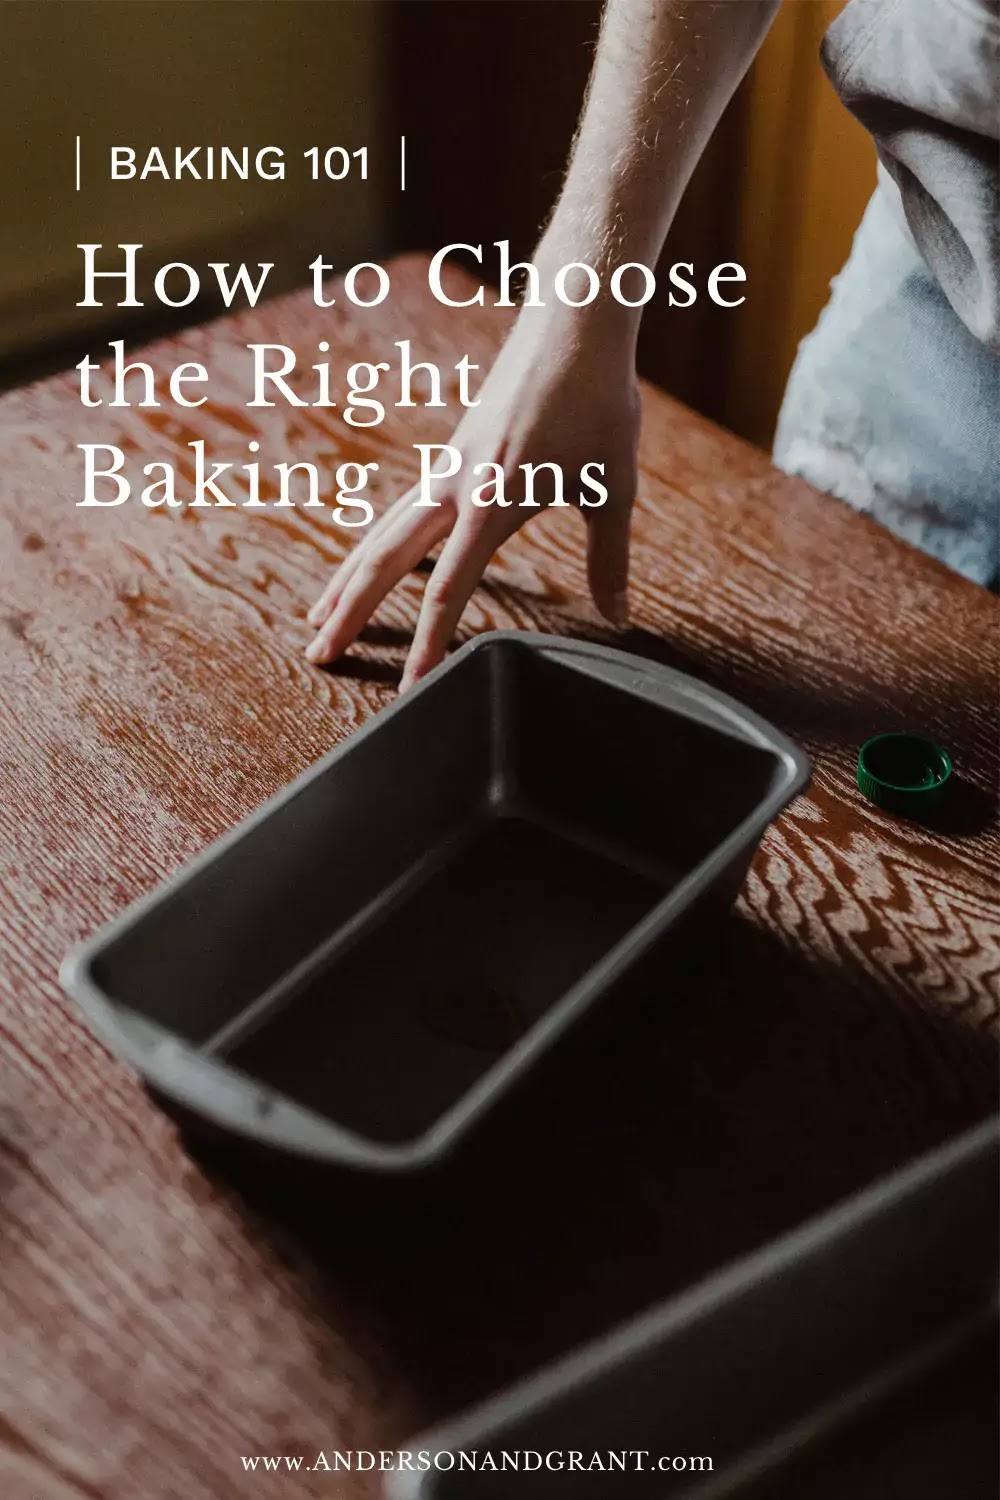 Baking 101: How to Choose the Right Baking Pans